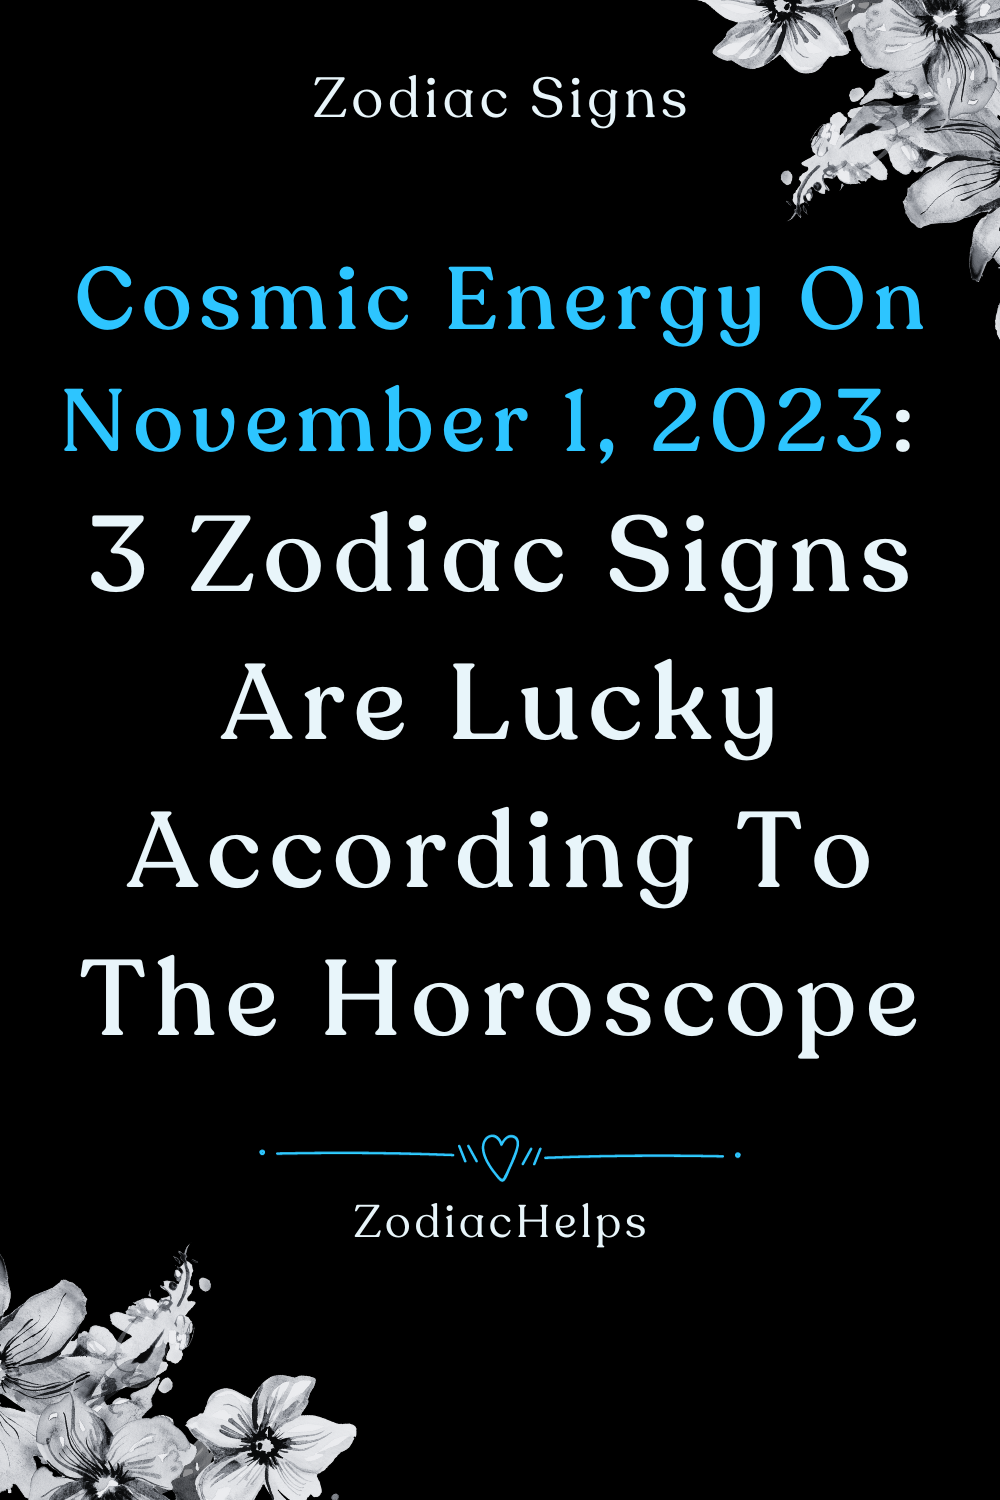 Cosmic Energy On November 1, 2023: 3 Zodiac Signs Are Lucky According To The Horoscope